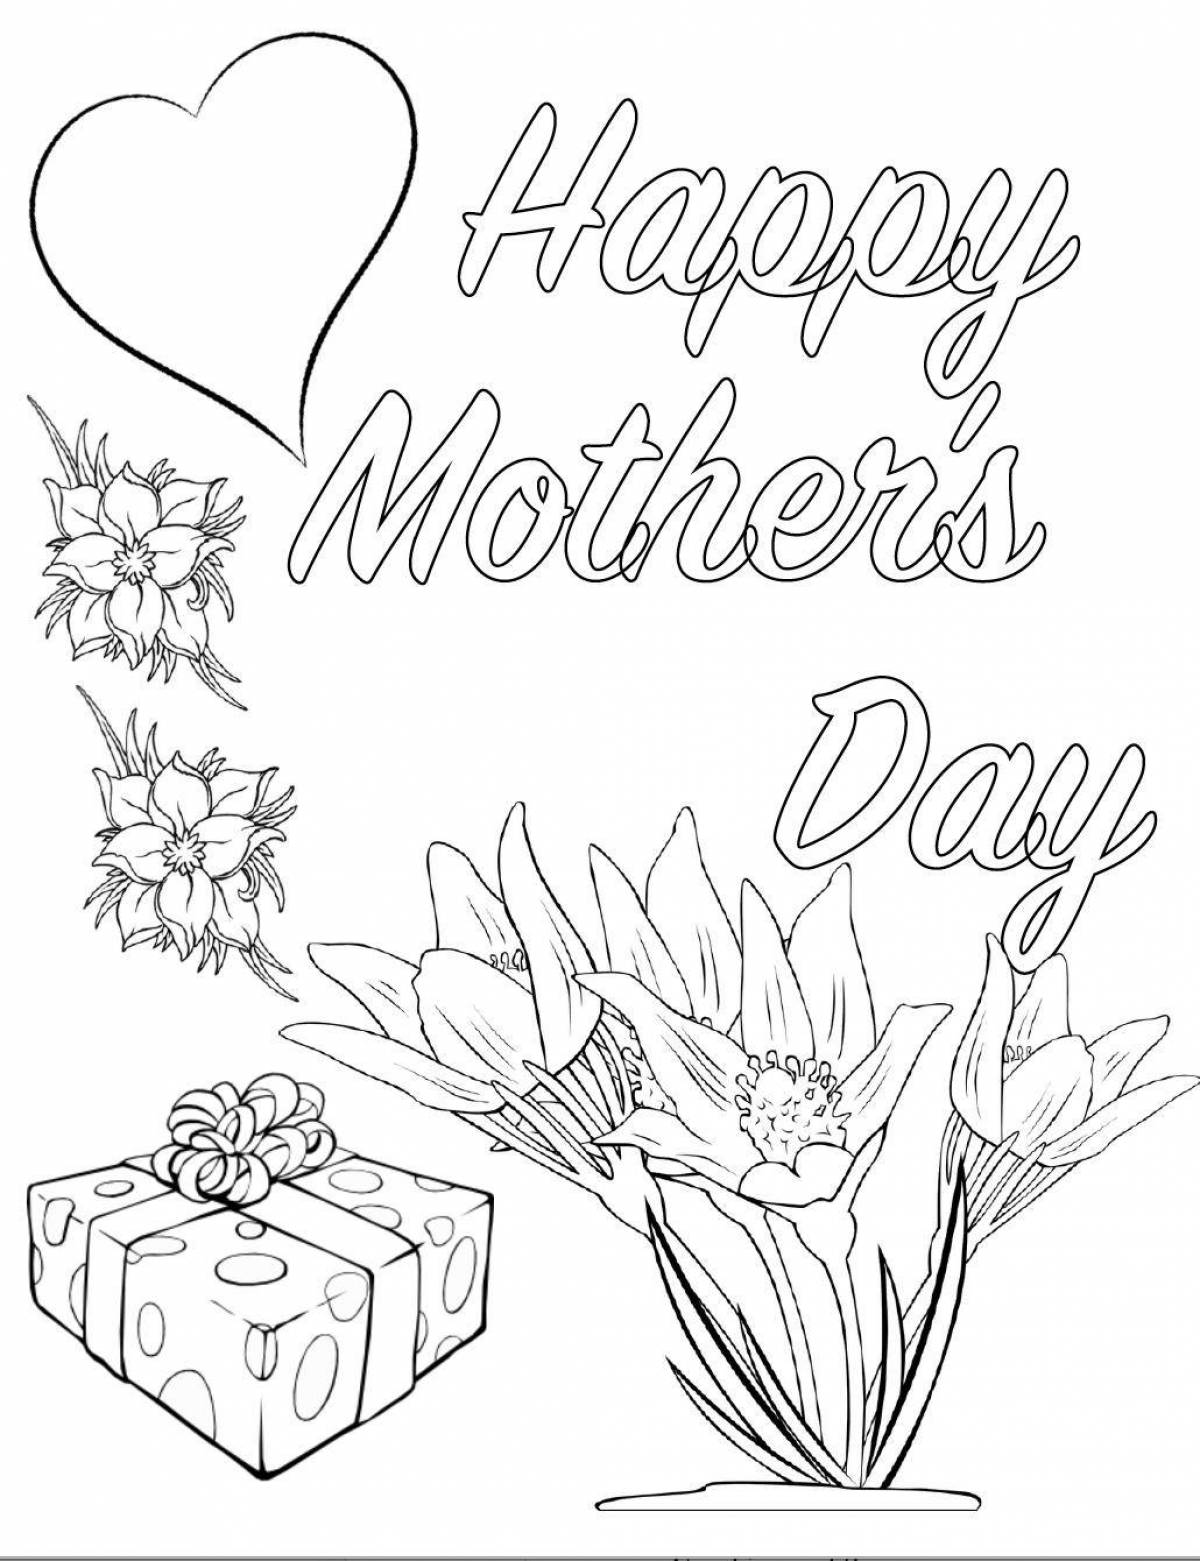 Coloring page adorable mother's day card